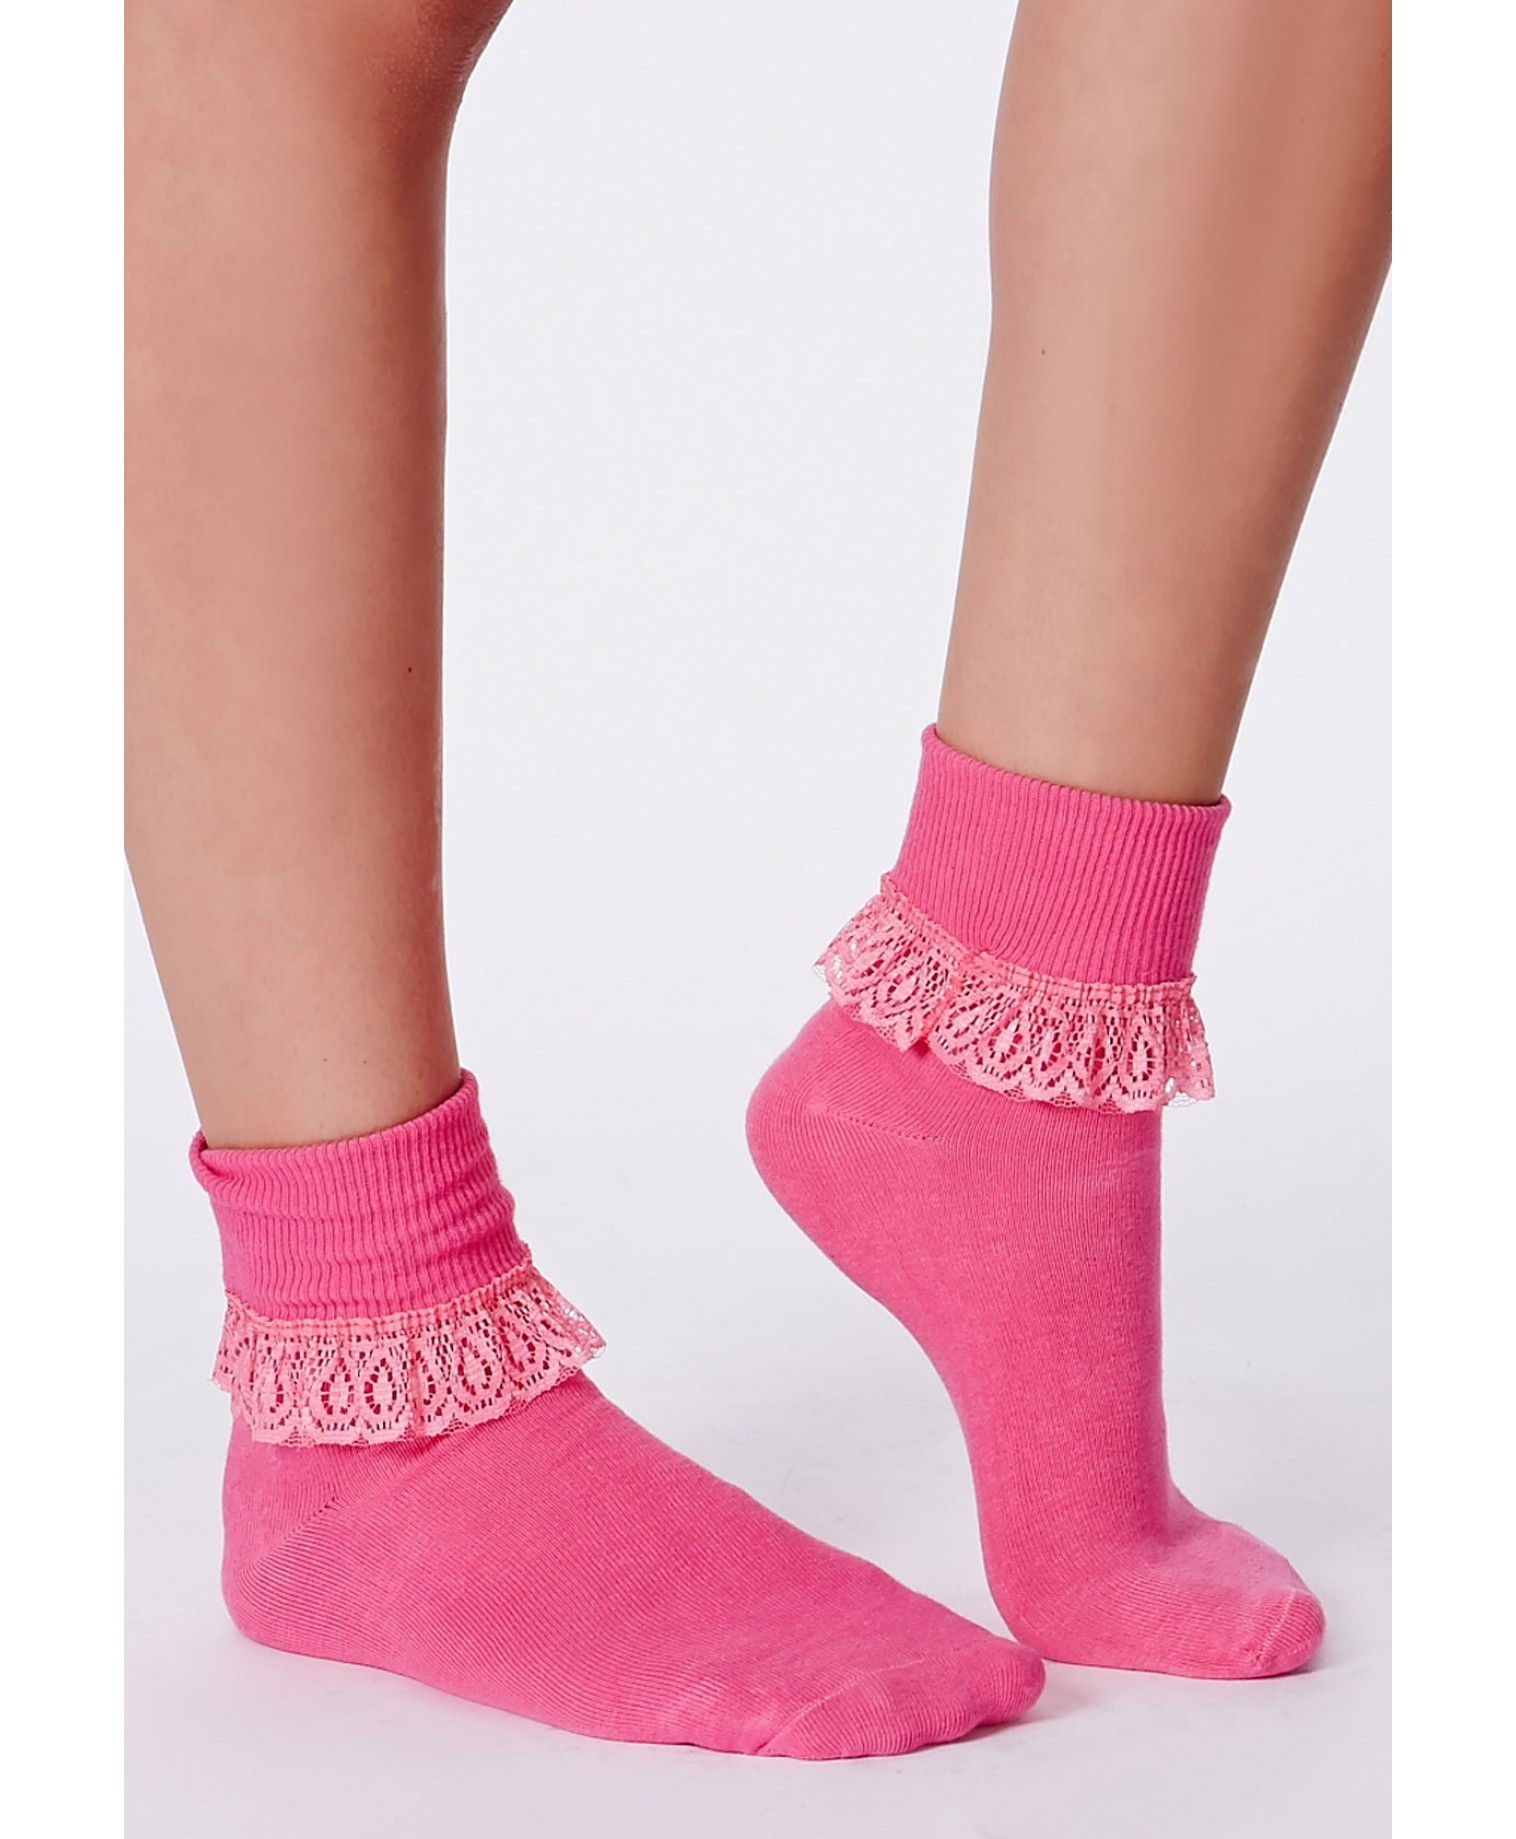 Missguided Marotta Pink Lace Frill Ankle Socks in Pink | Lyst